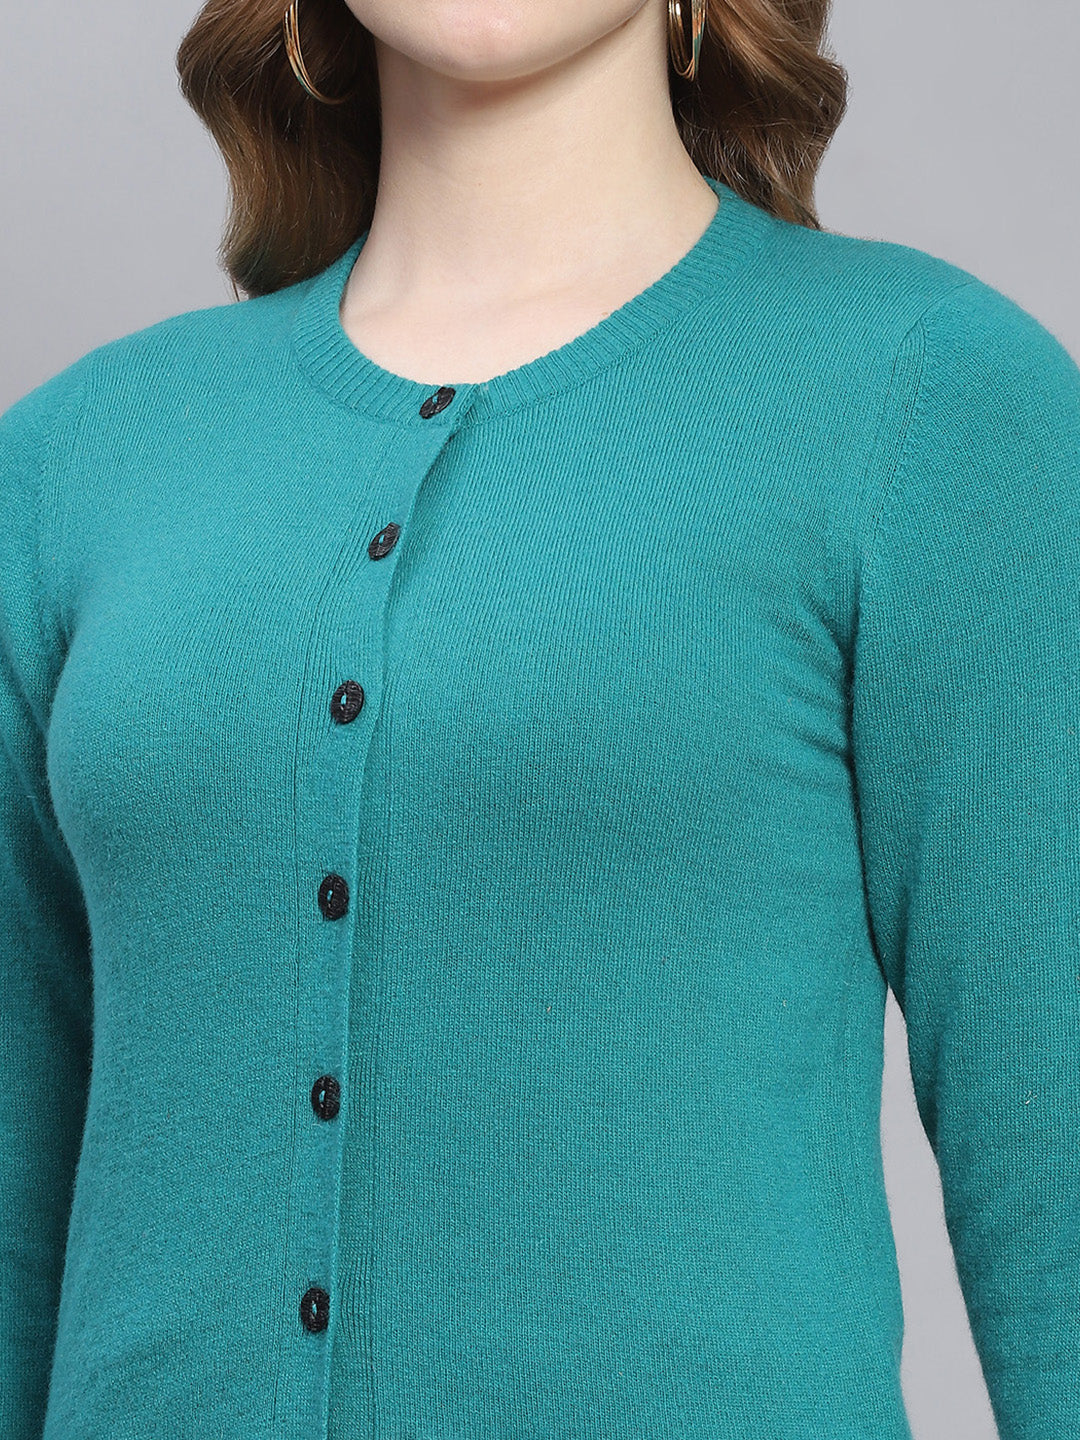 Women Teal Blue Solid Round Neck Full Sleeve Cardigans